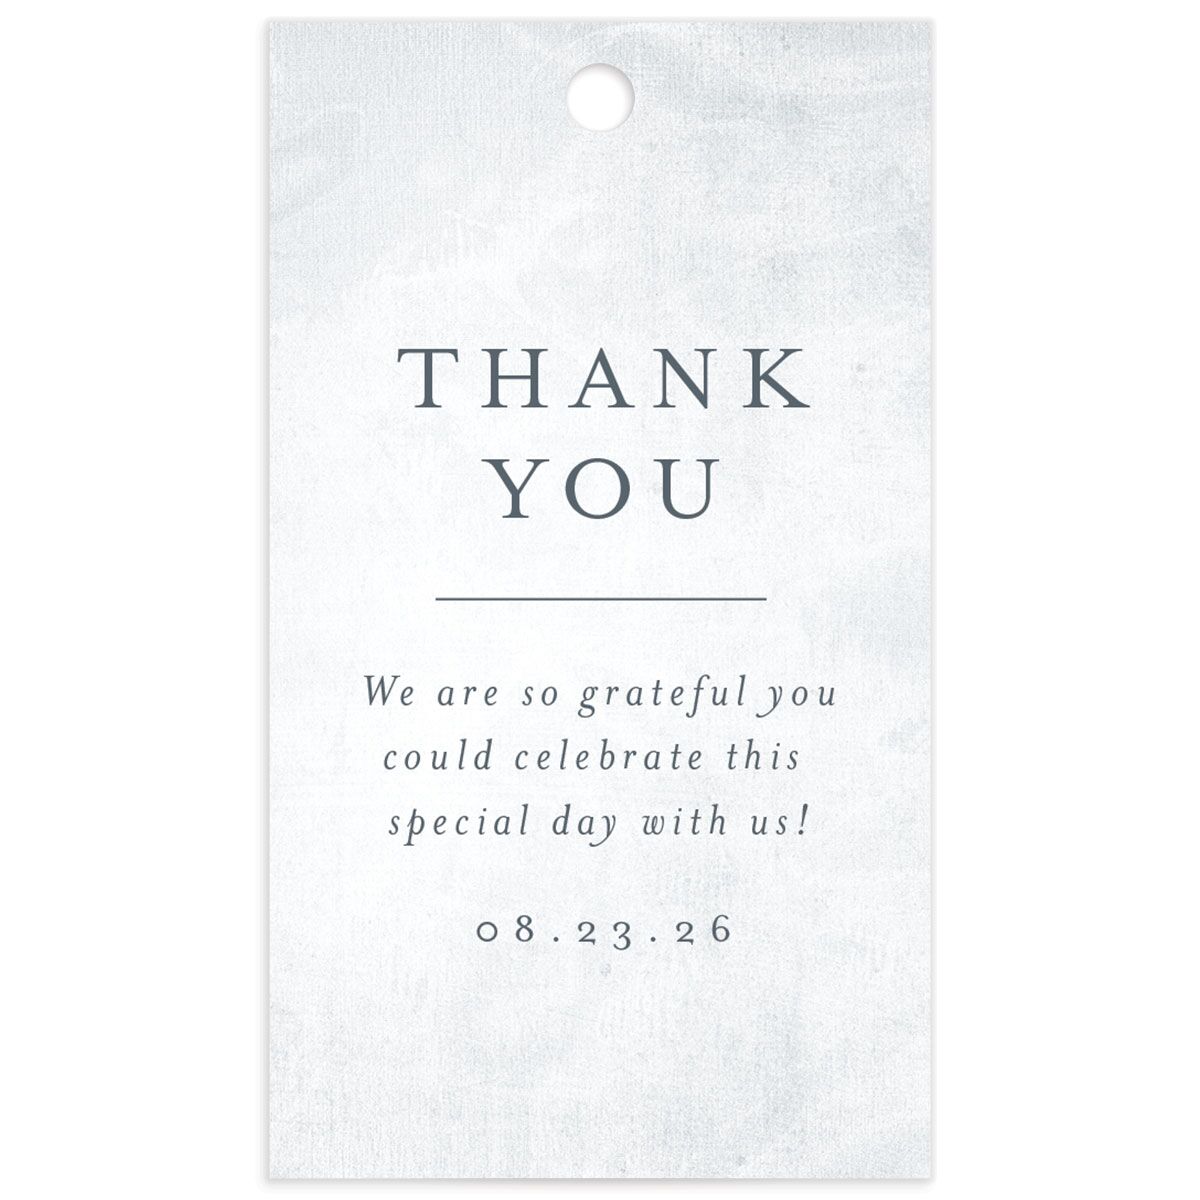 Breezy Botanical Favor Gift Tags back in French Blue